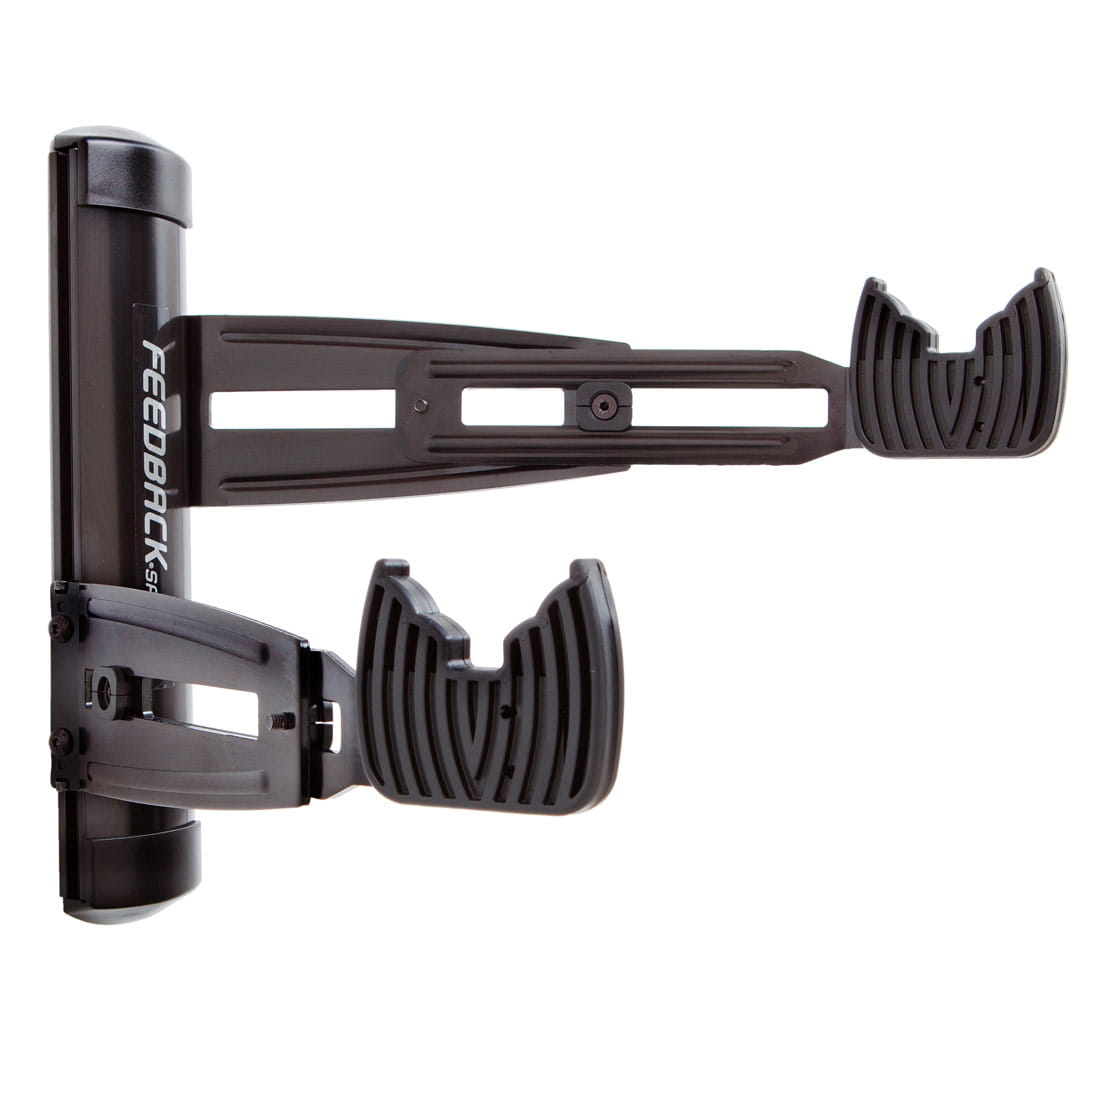 Feedback Sports Velo Wall Rack 2D Bicycle holder wall mount